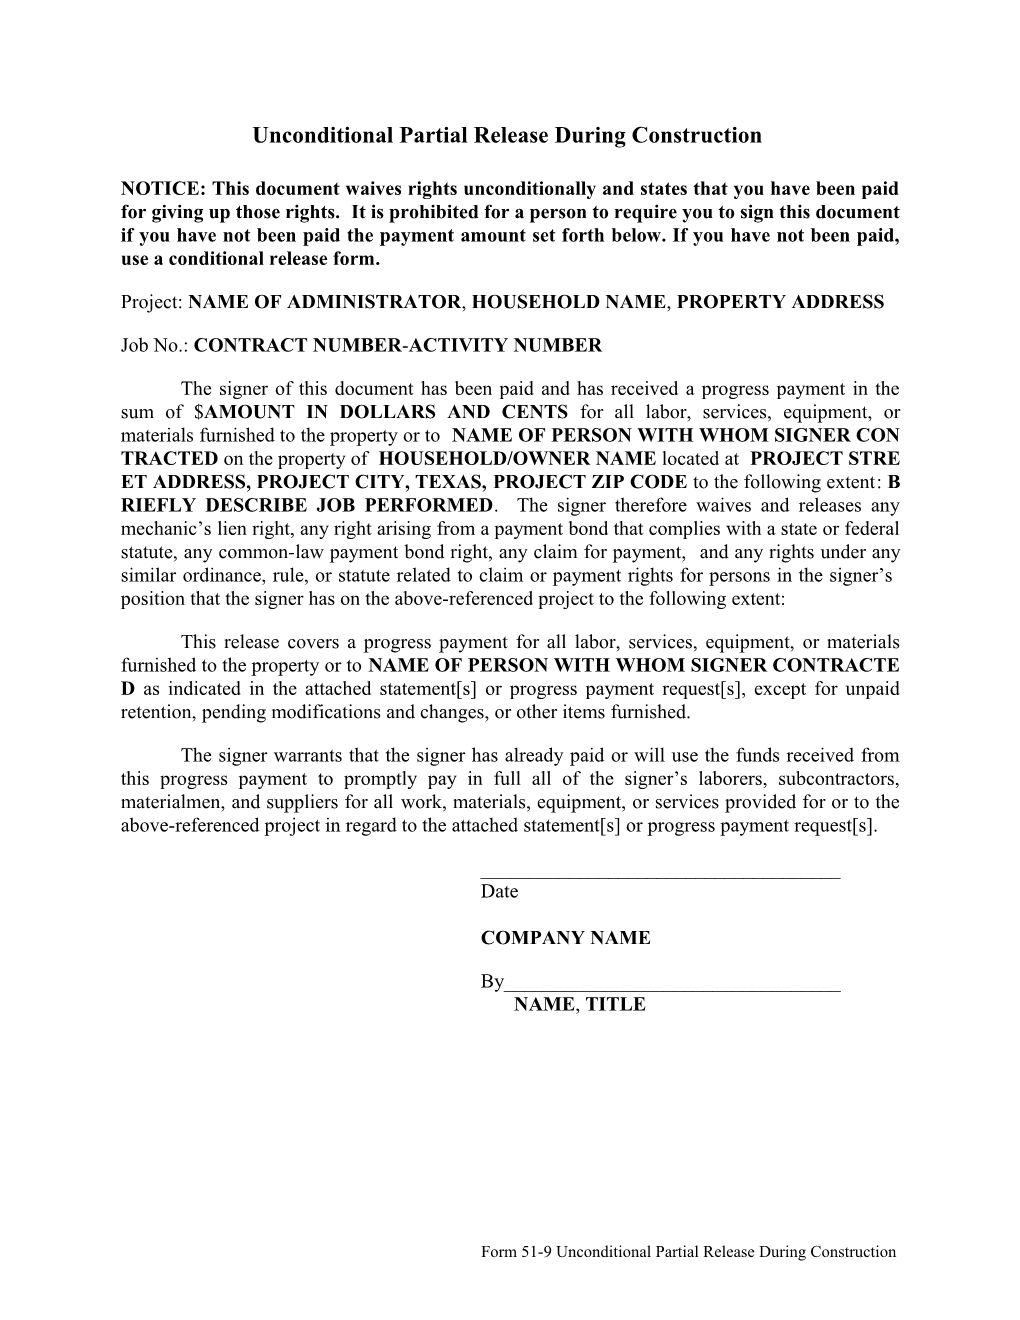 Form 51-9 Unconditional Partial Release During Construction